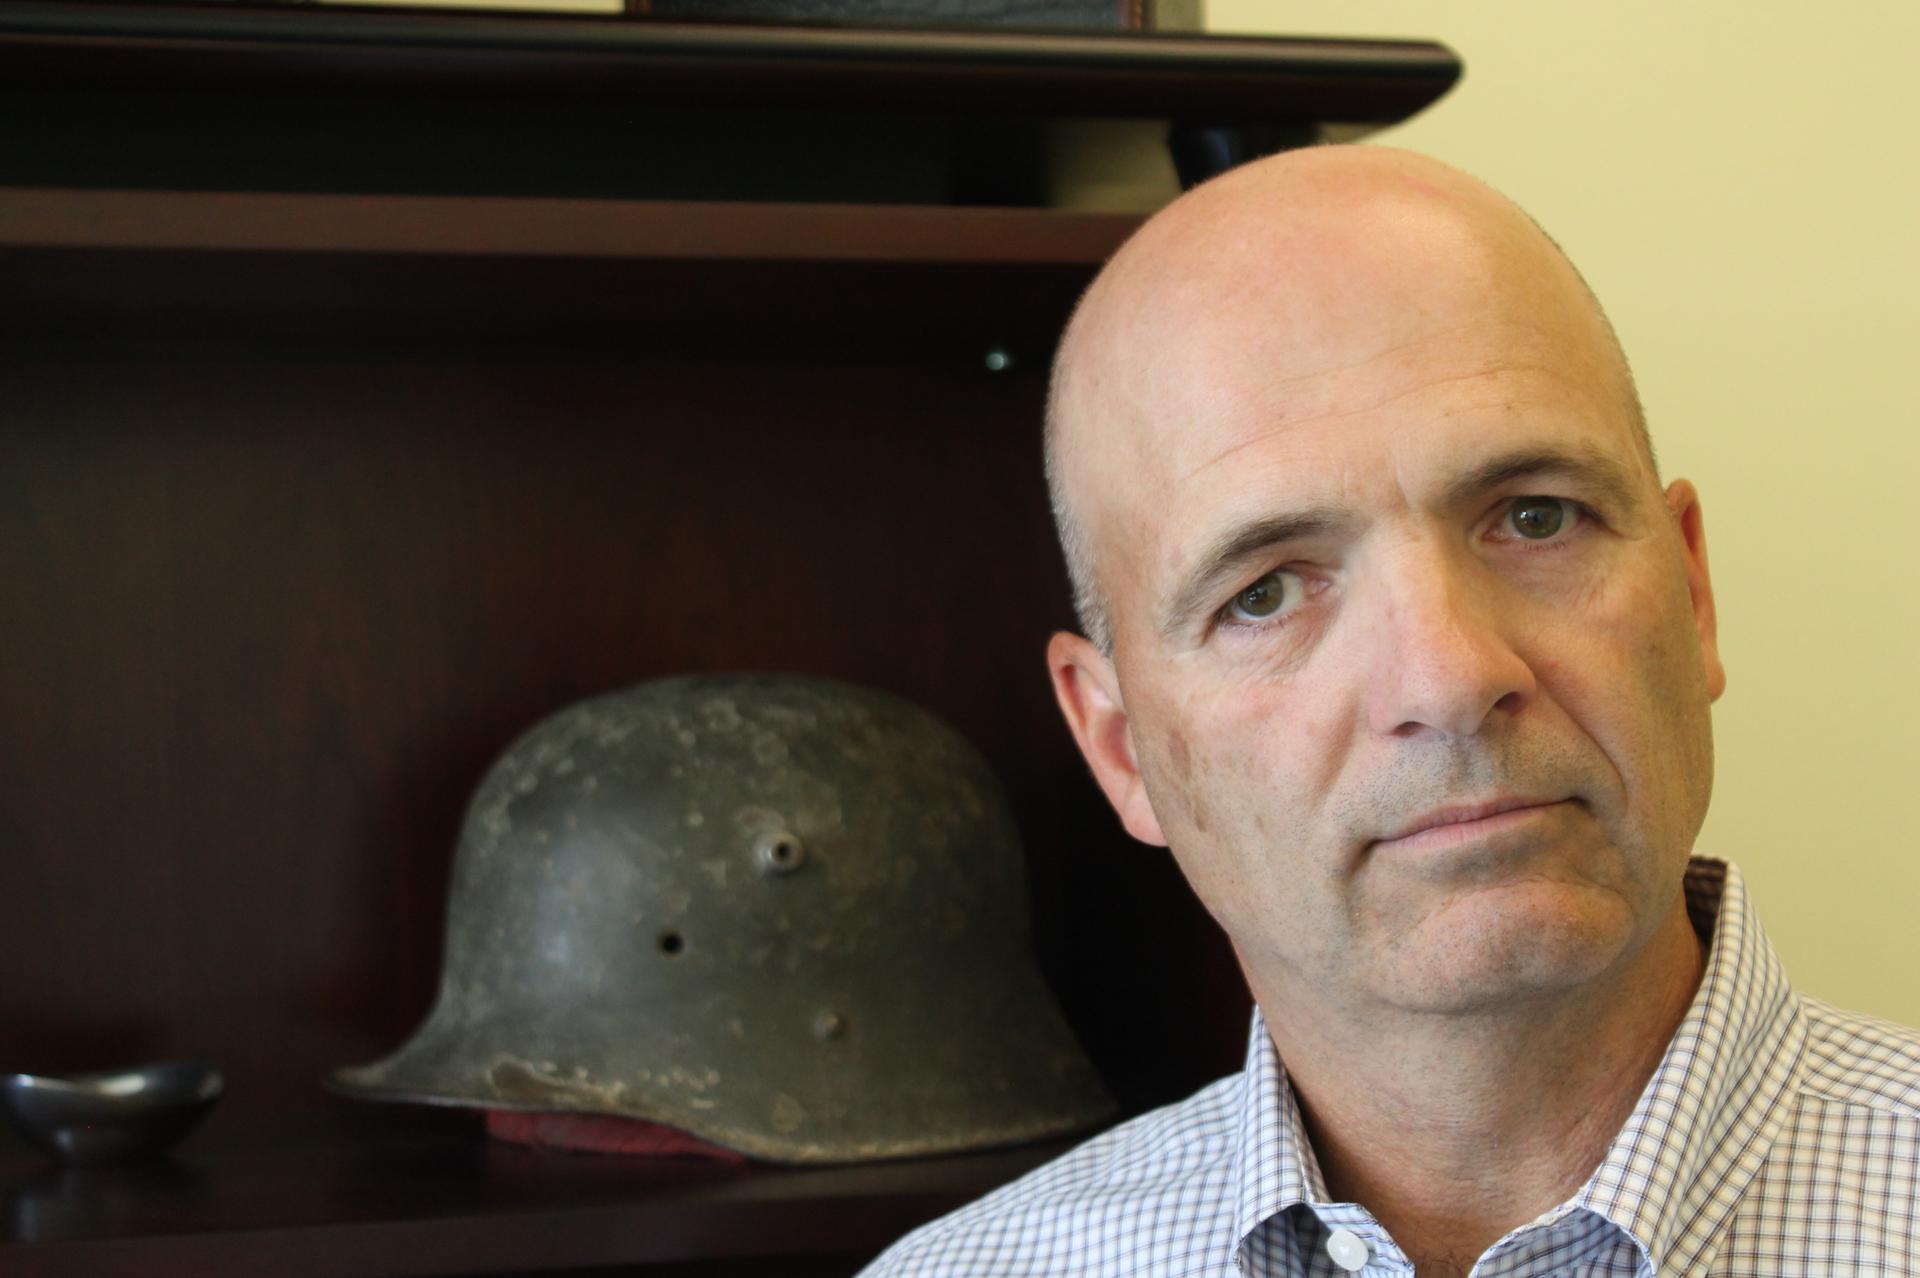 Former Special Forces Engineer Sargeant Layne Morris lost the vision in his right eye during a grenade attack in Afghanistan in 2002. He's now suing the former Guantanamo detainee who threw the grenade.